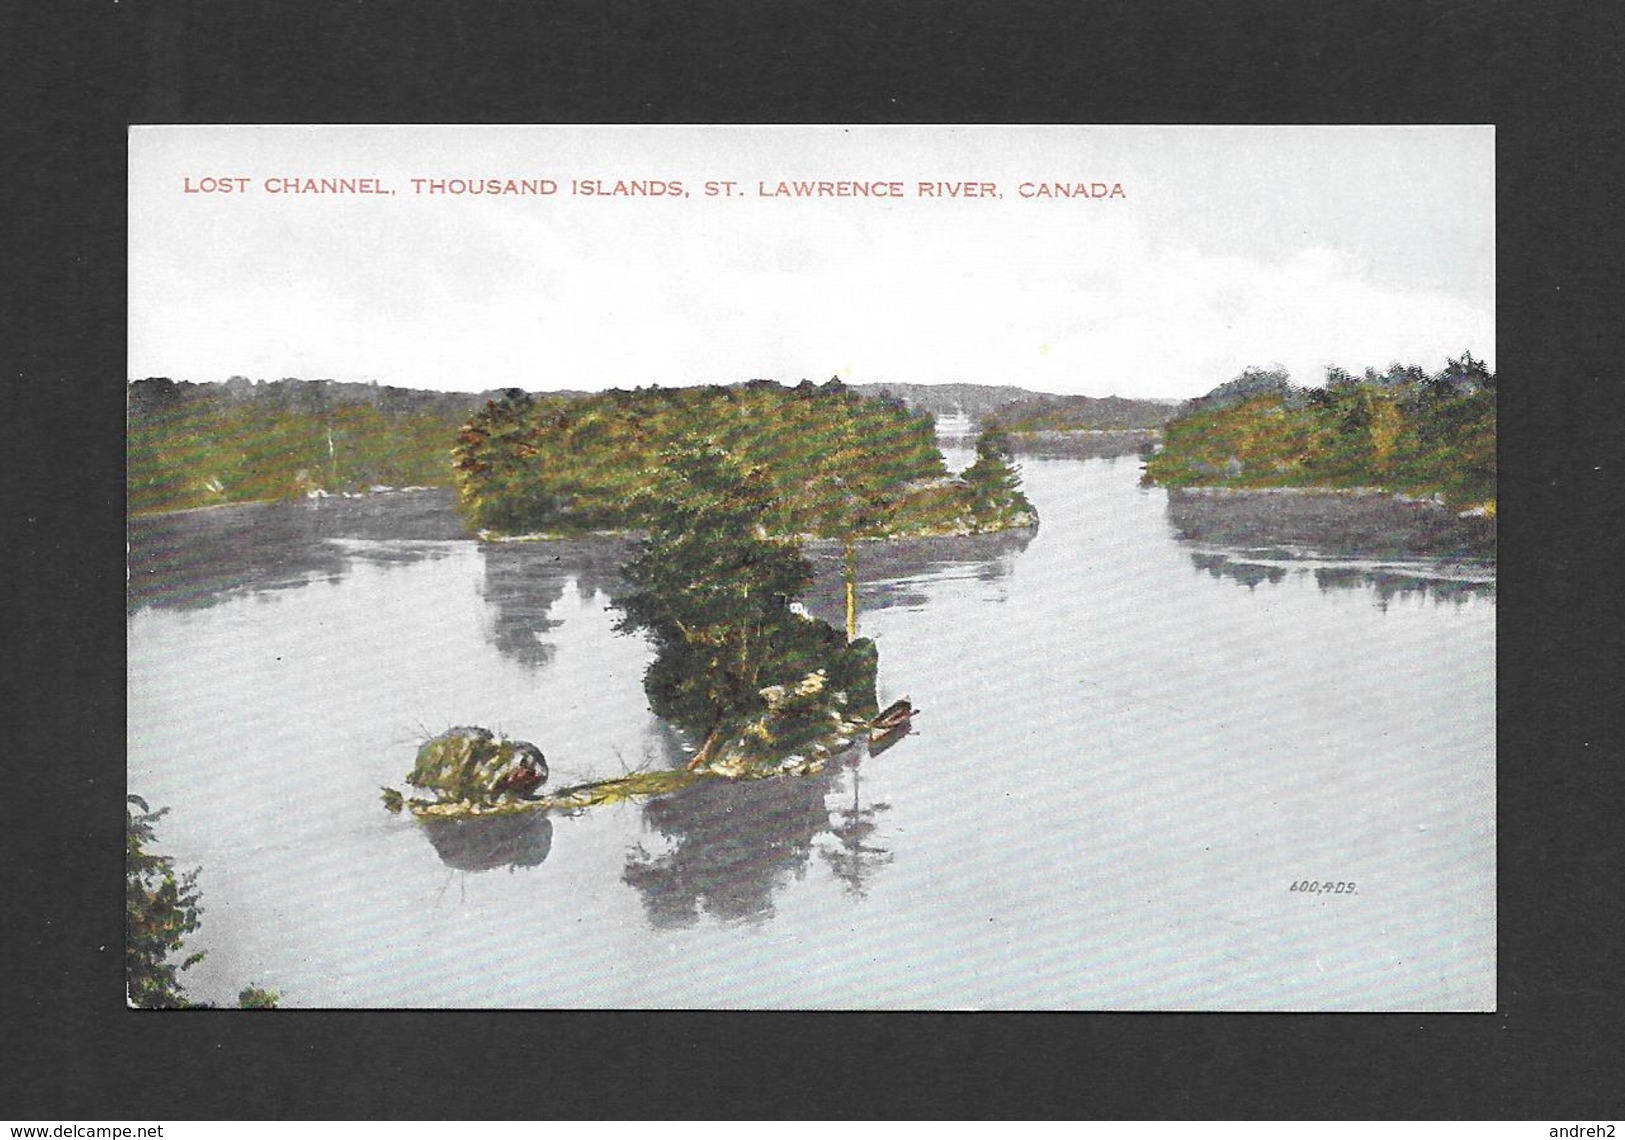 LOST CHANNEL- THOUSAND ISLANDS - ONTARIO - ST LAWRENCE RIVER - BY VALENTINE BLACK - Thousand Islands